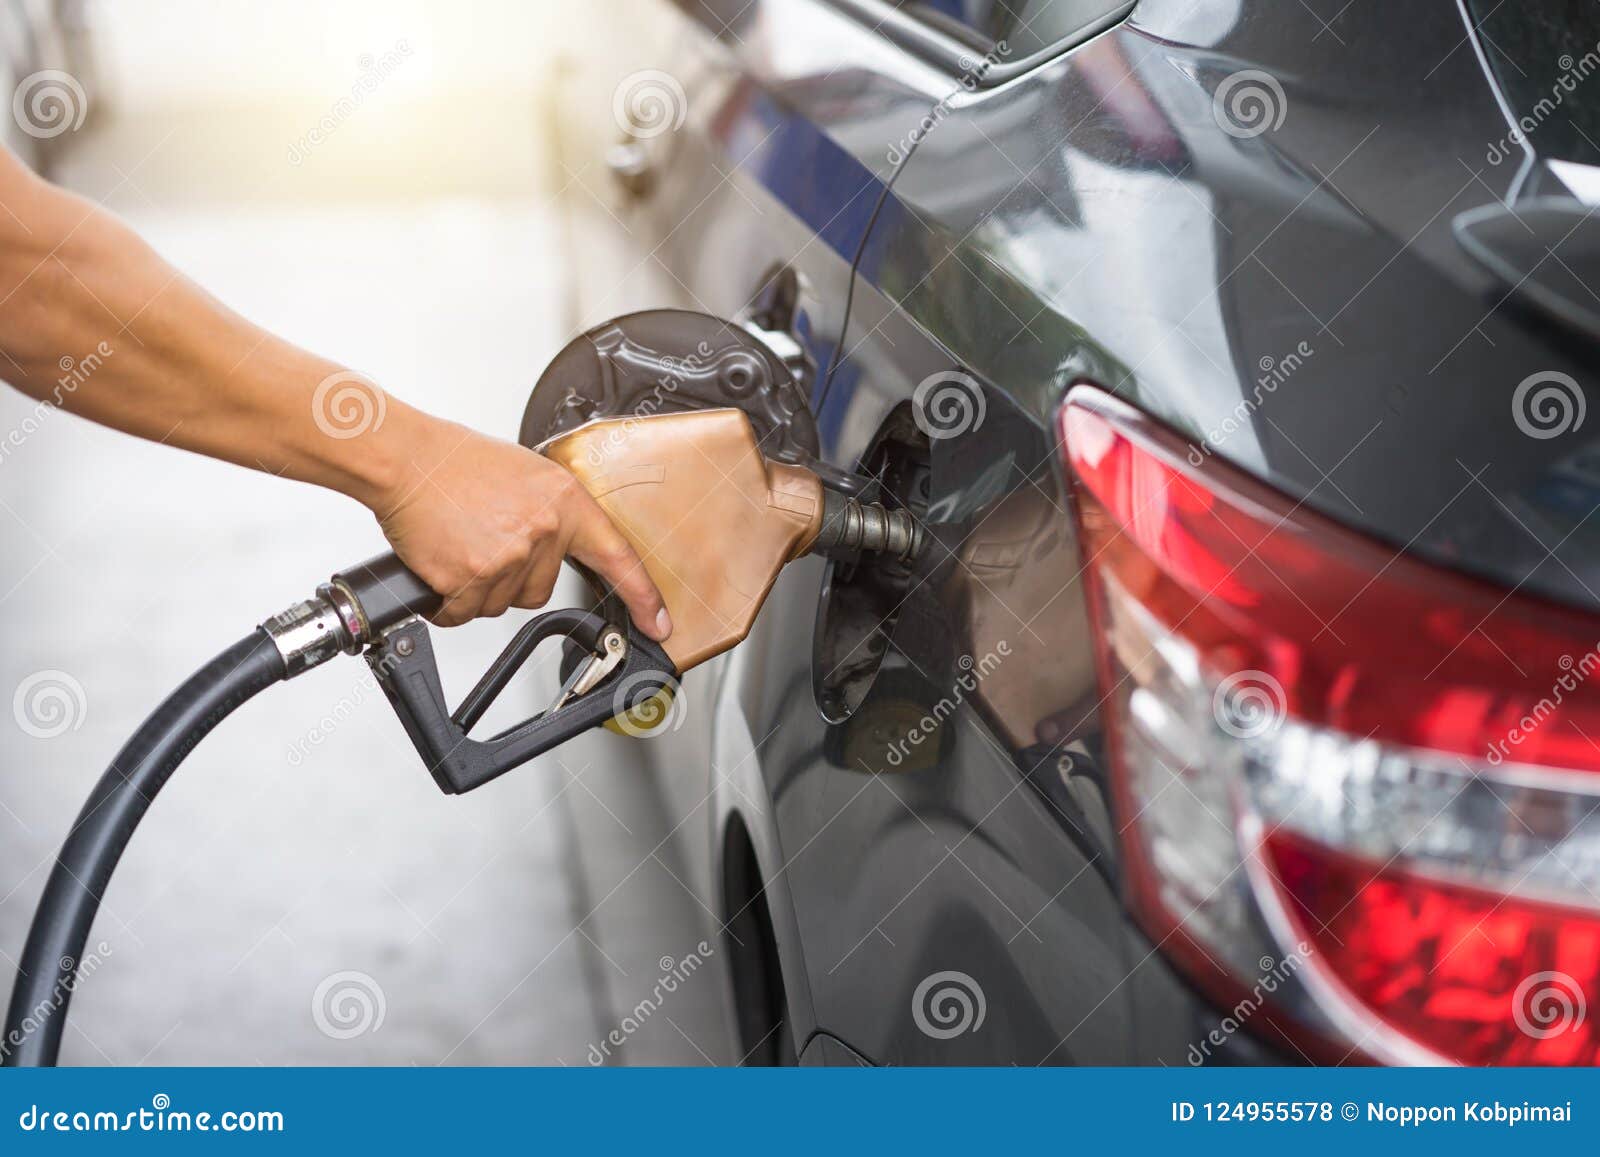 Pumping Gasoline Fuel in Car at Gas Station Pump, Refueling Fossil Fuel.  Stock Photo - Image of person, biological: 124955578